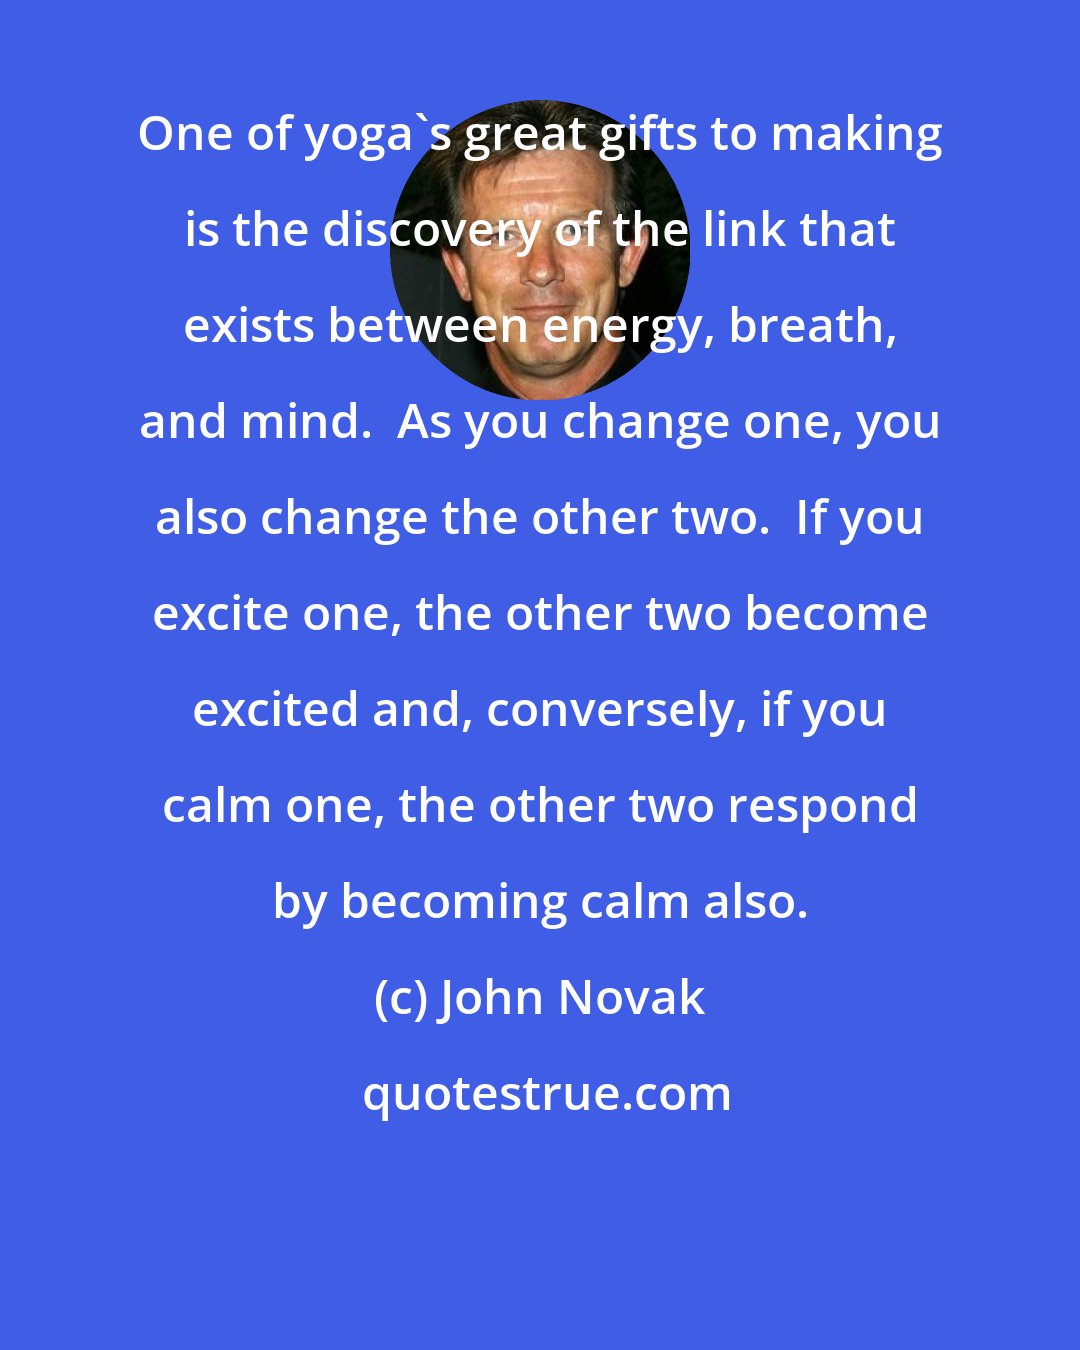 John Novak: One of yoga's great gifts to making is the discovery of the link that exists between energy, breath, and mind.  As you change one, you also change the other two.  If you excite one, the other two become excited and, conversely, if you calm one, the other two respond by becoming calm also.